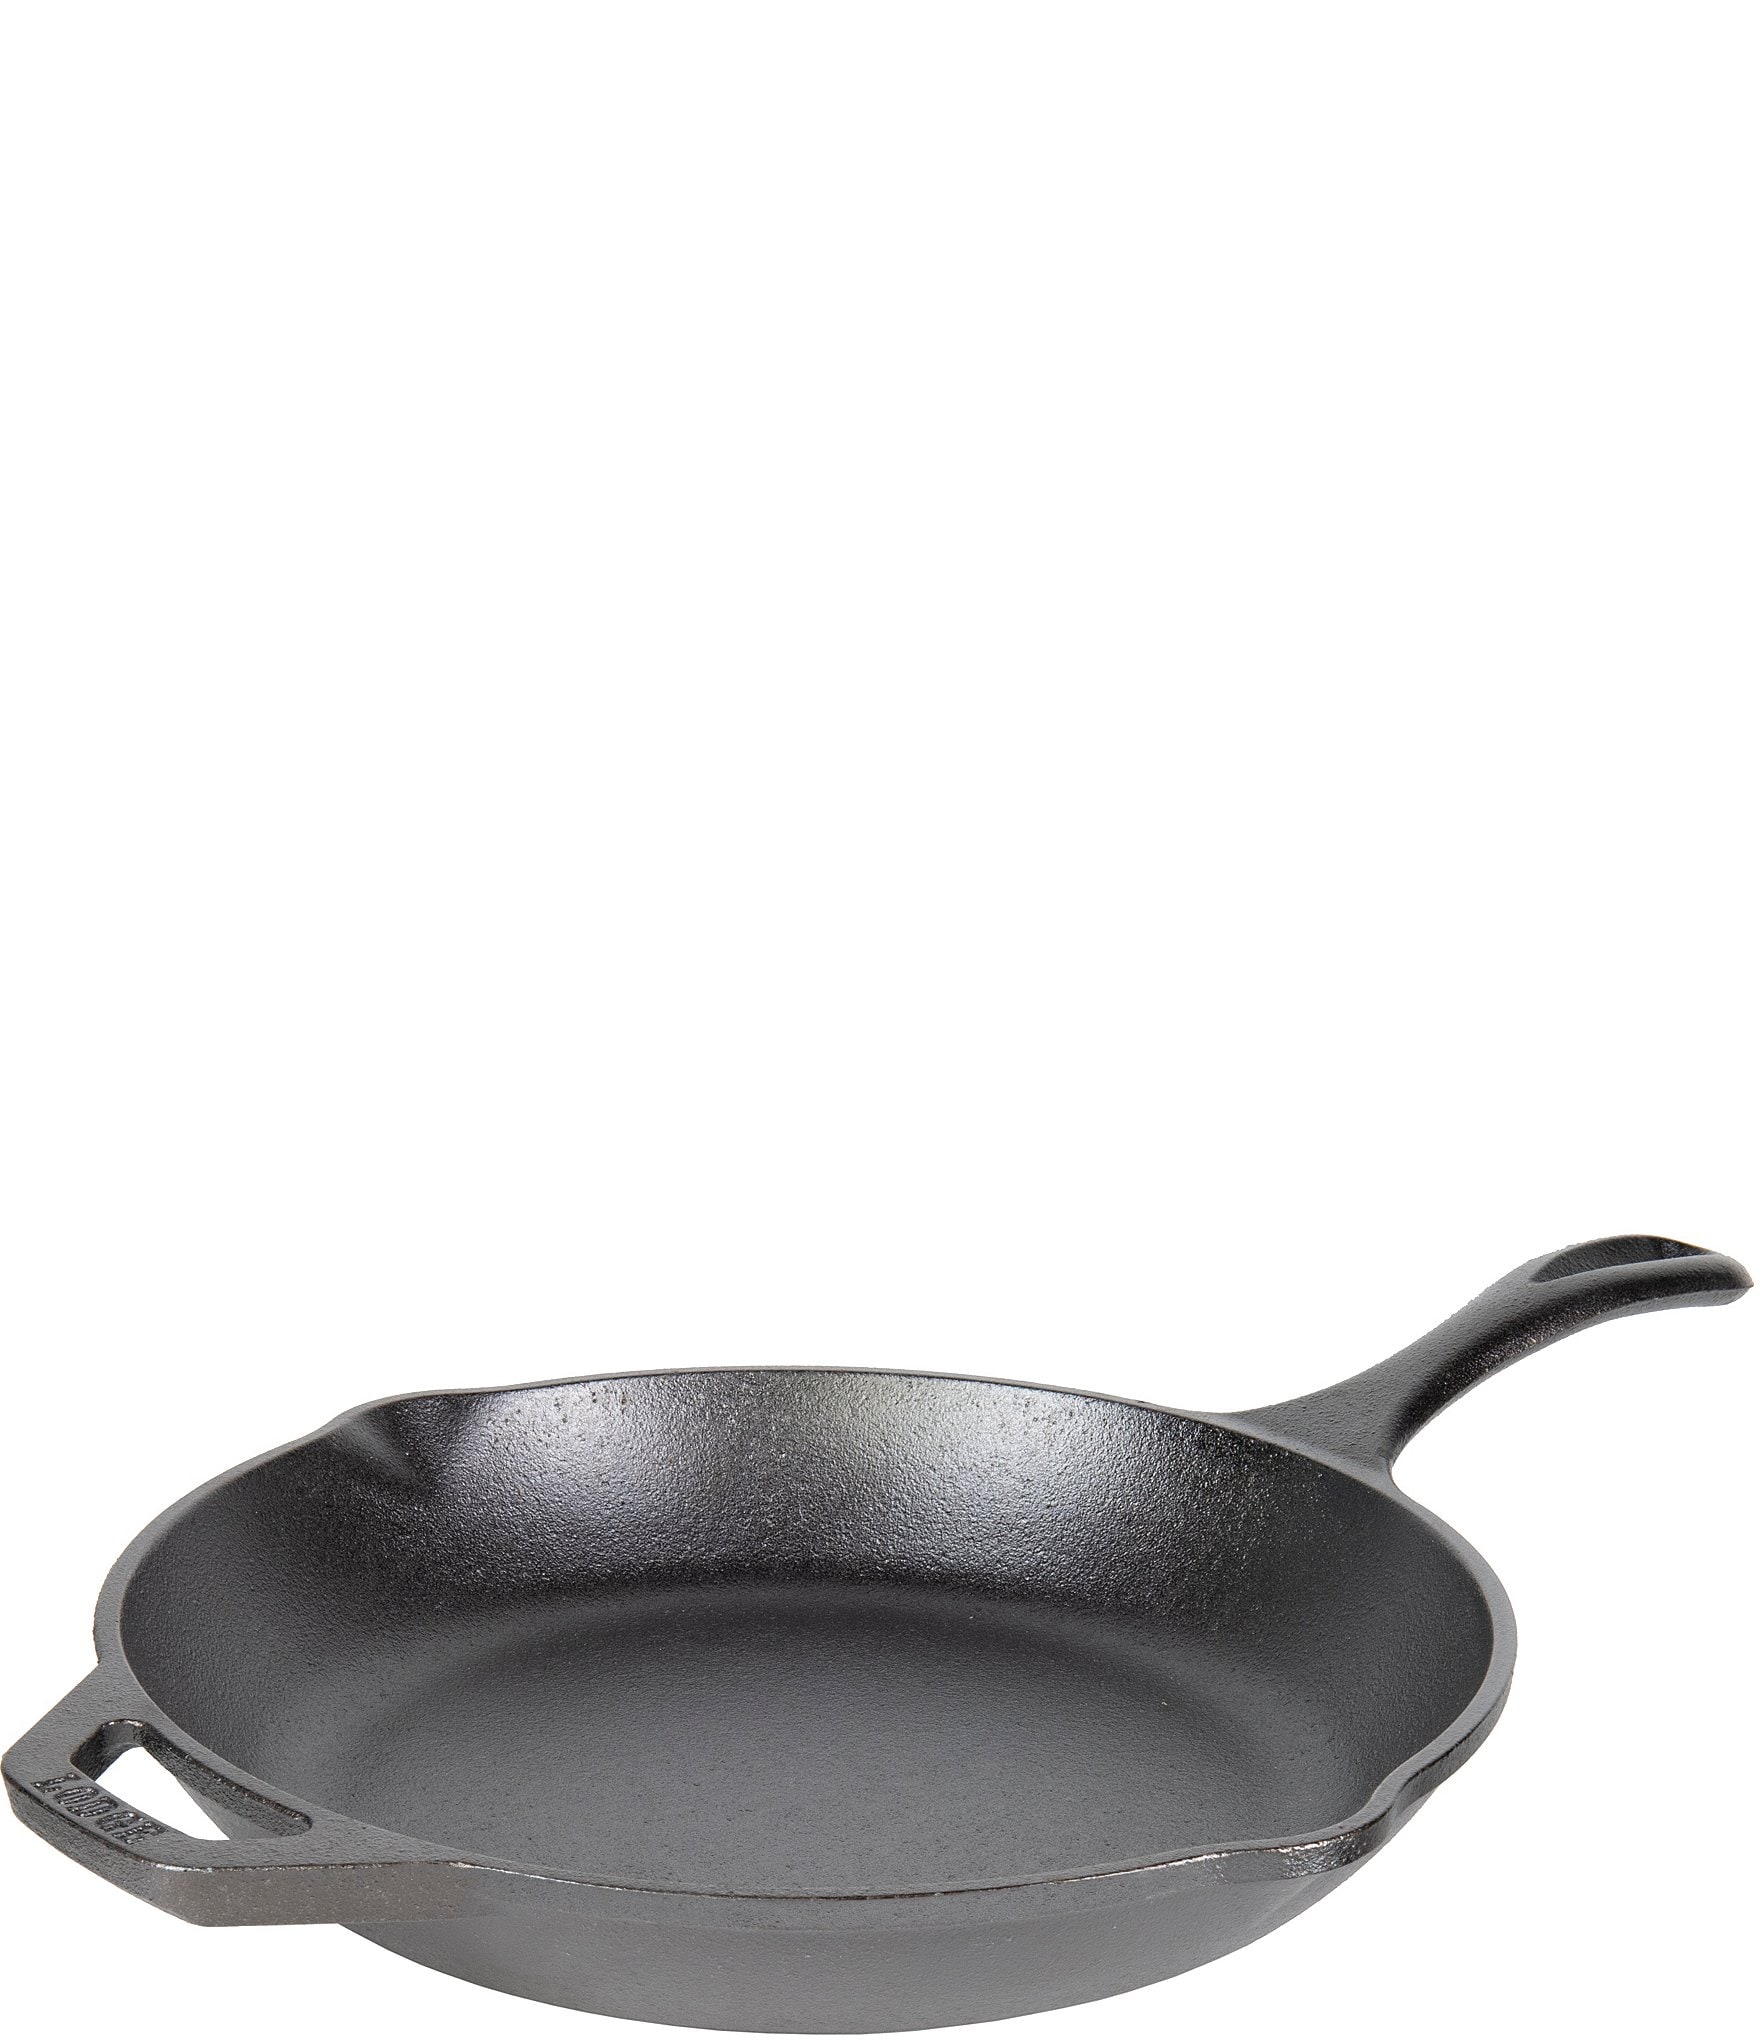  Lodge 10 Inch Cast Iron Chef Skillet. Pre-Seasoned Cast Iron Pan  with Sloped Edges for Sautes and Stir Fry.: Cast Iron Skillet: Home &  Kitchen